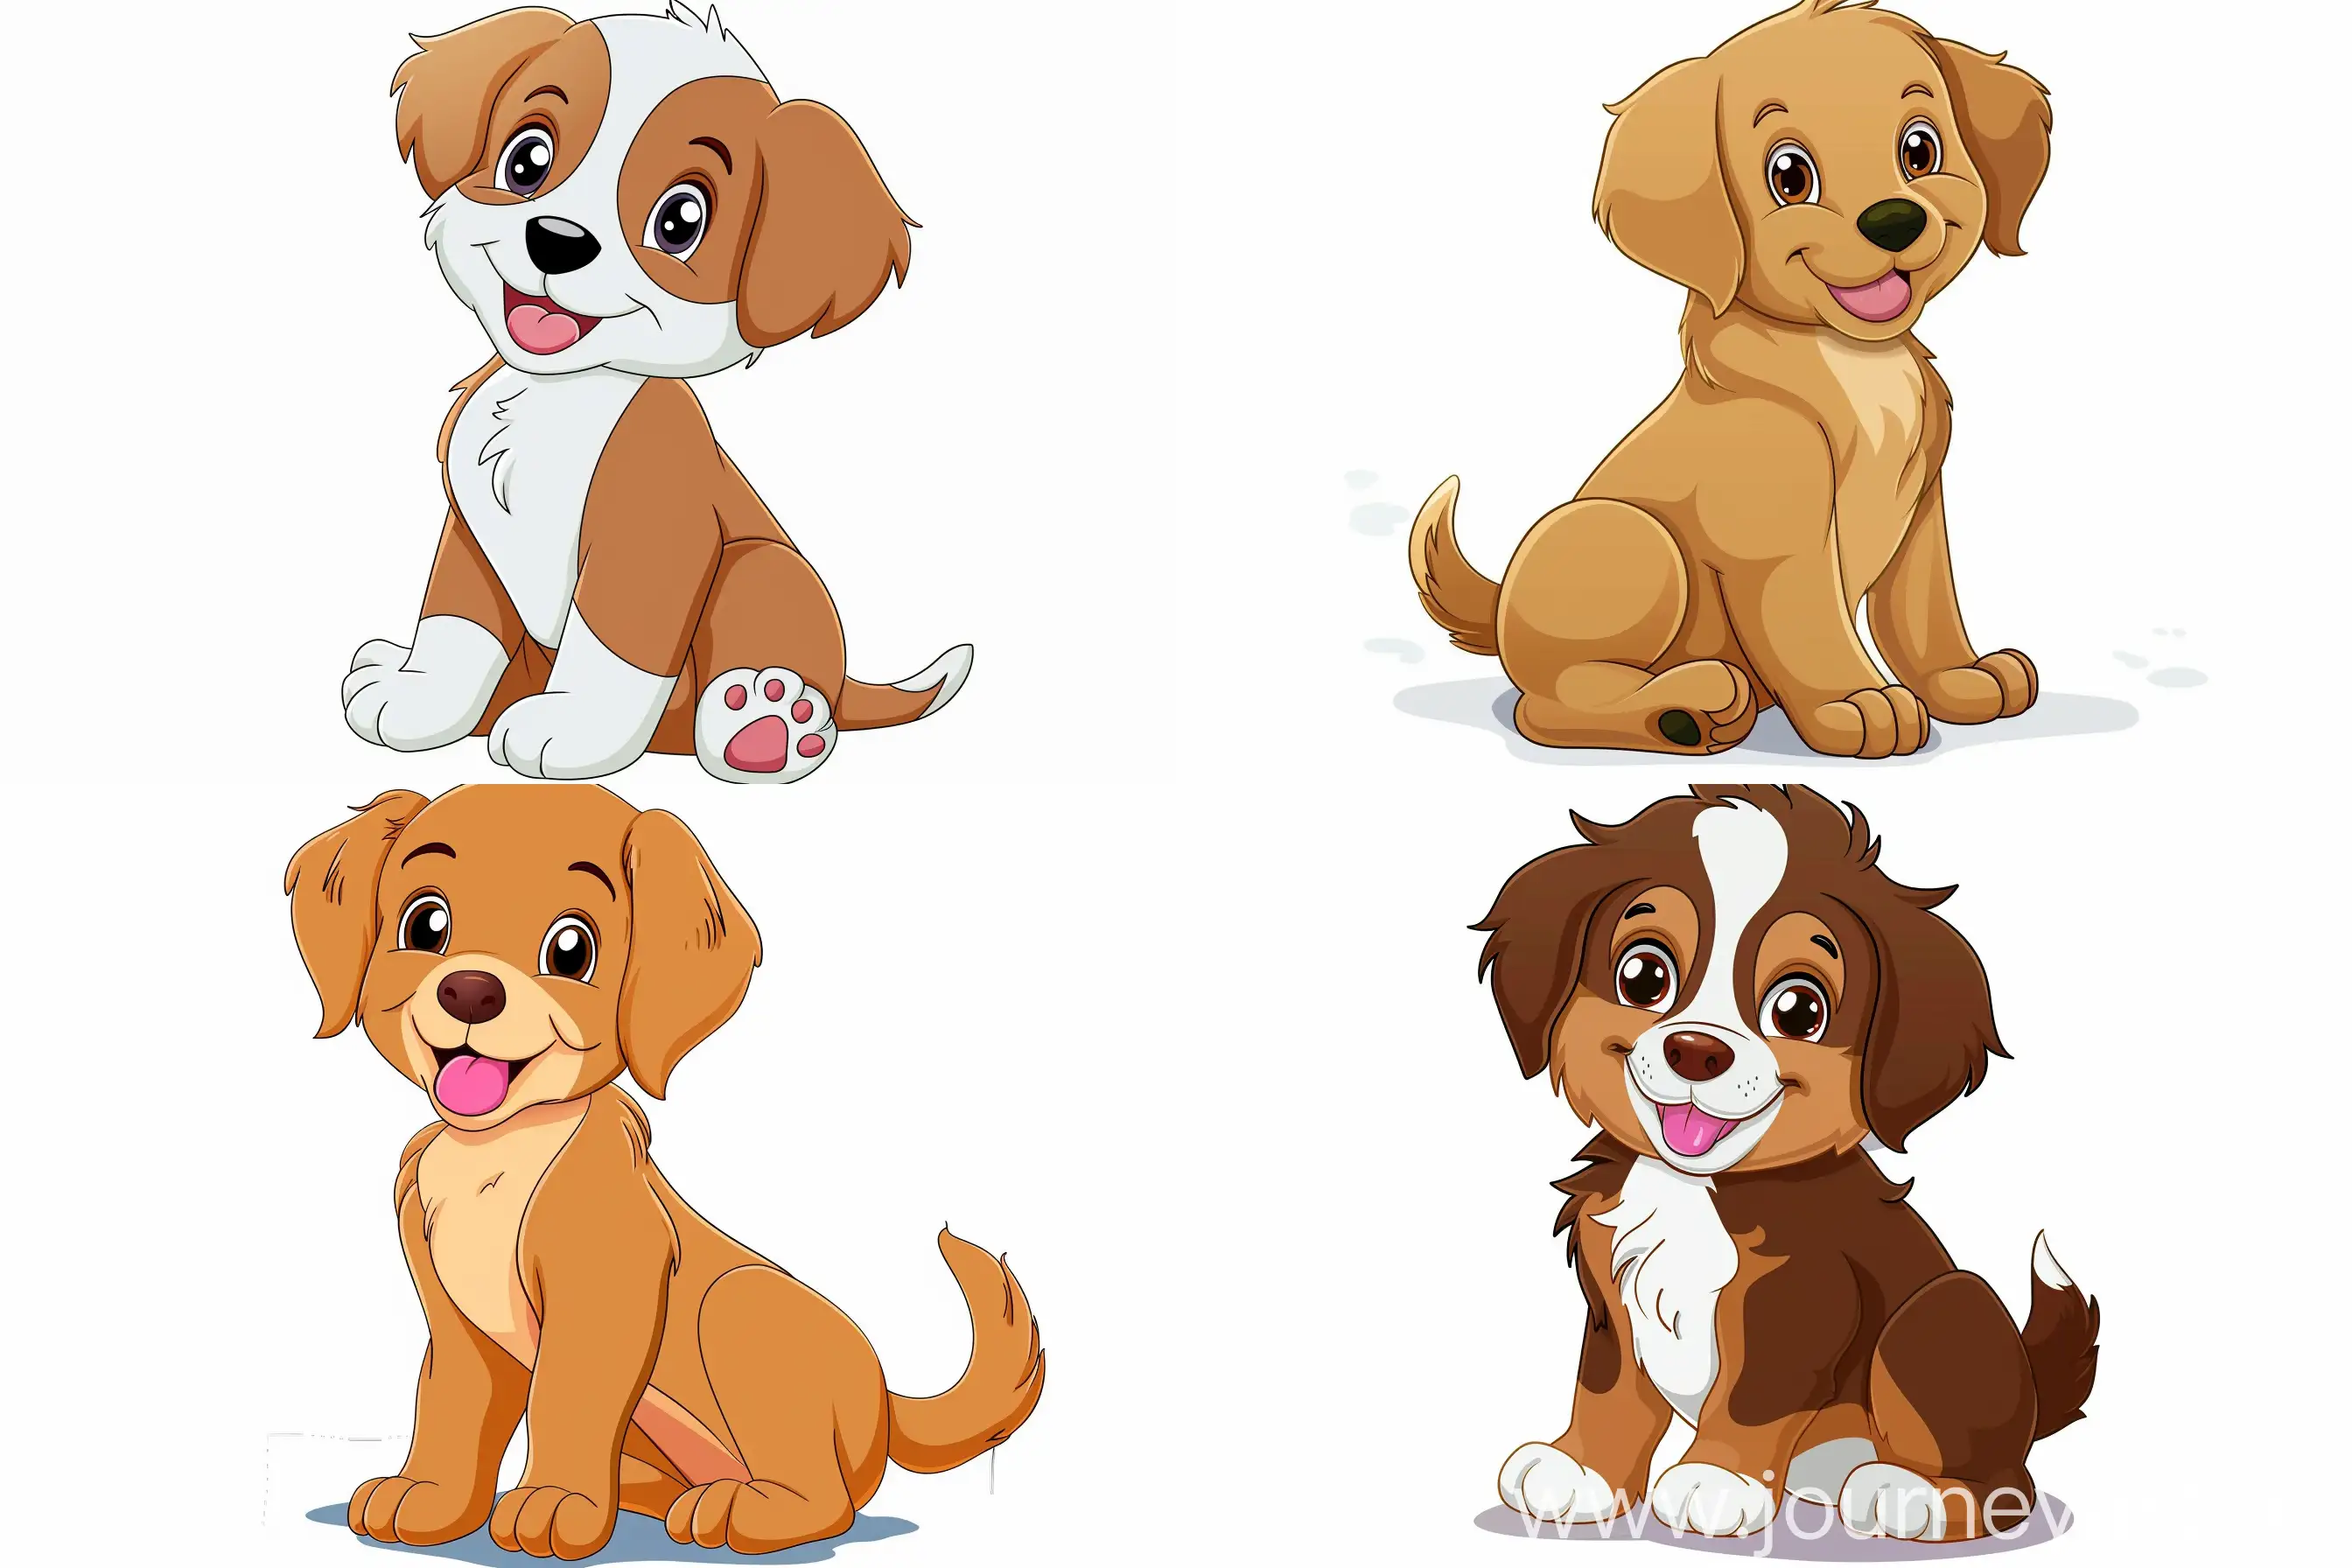 Adorable-Cartoon-Puppy-Smiling-on-White-Background